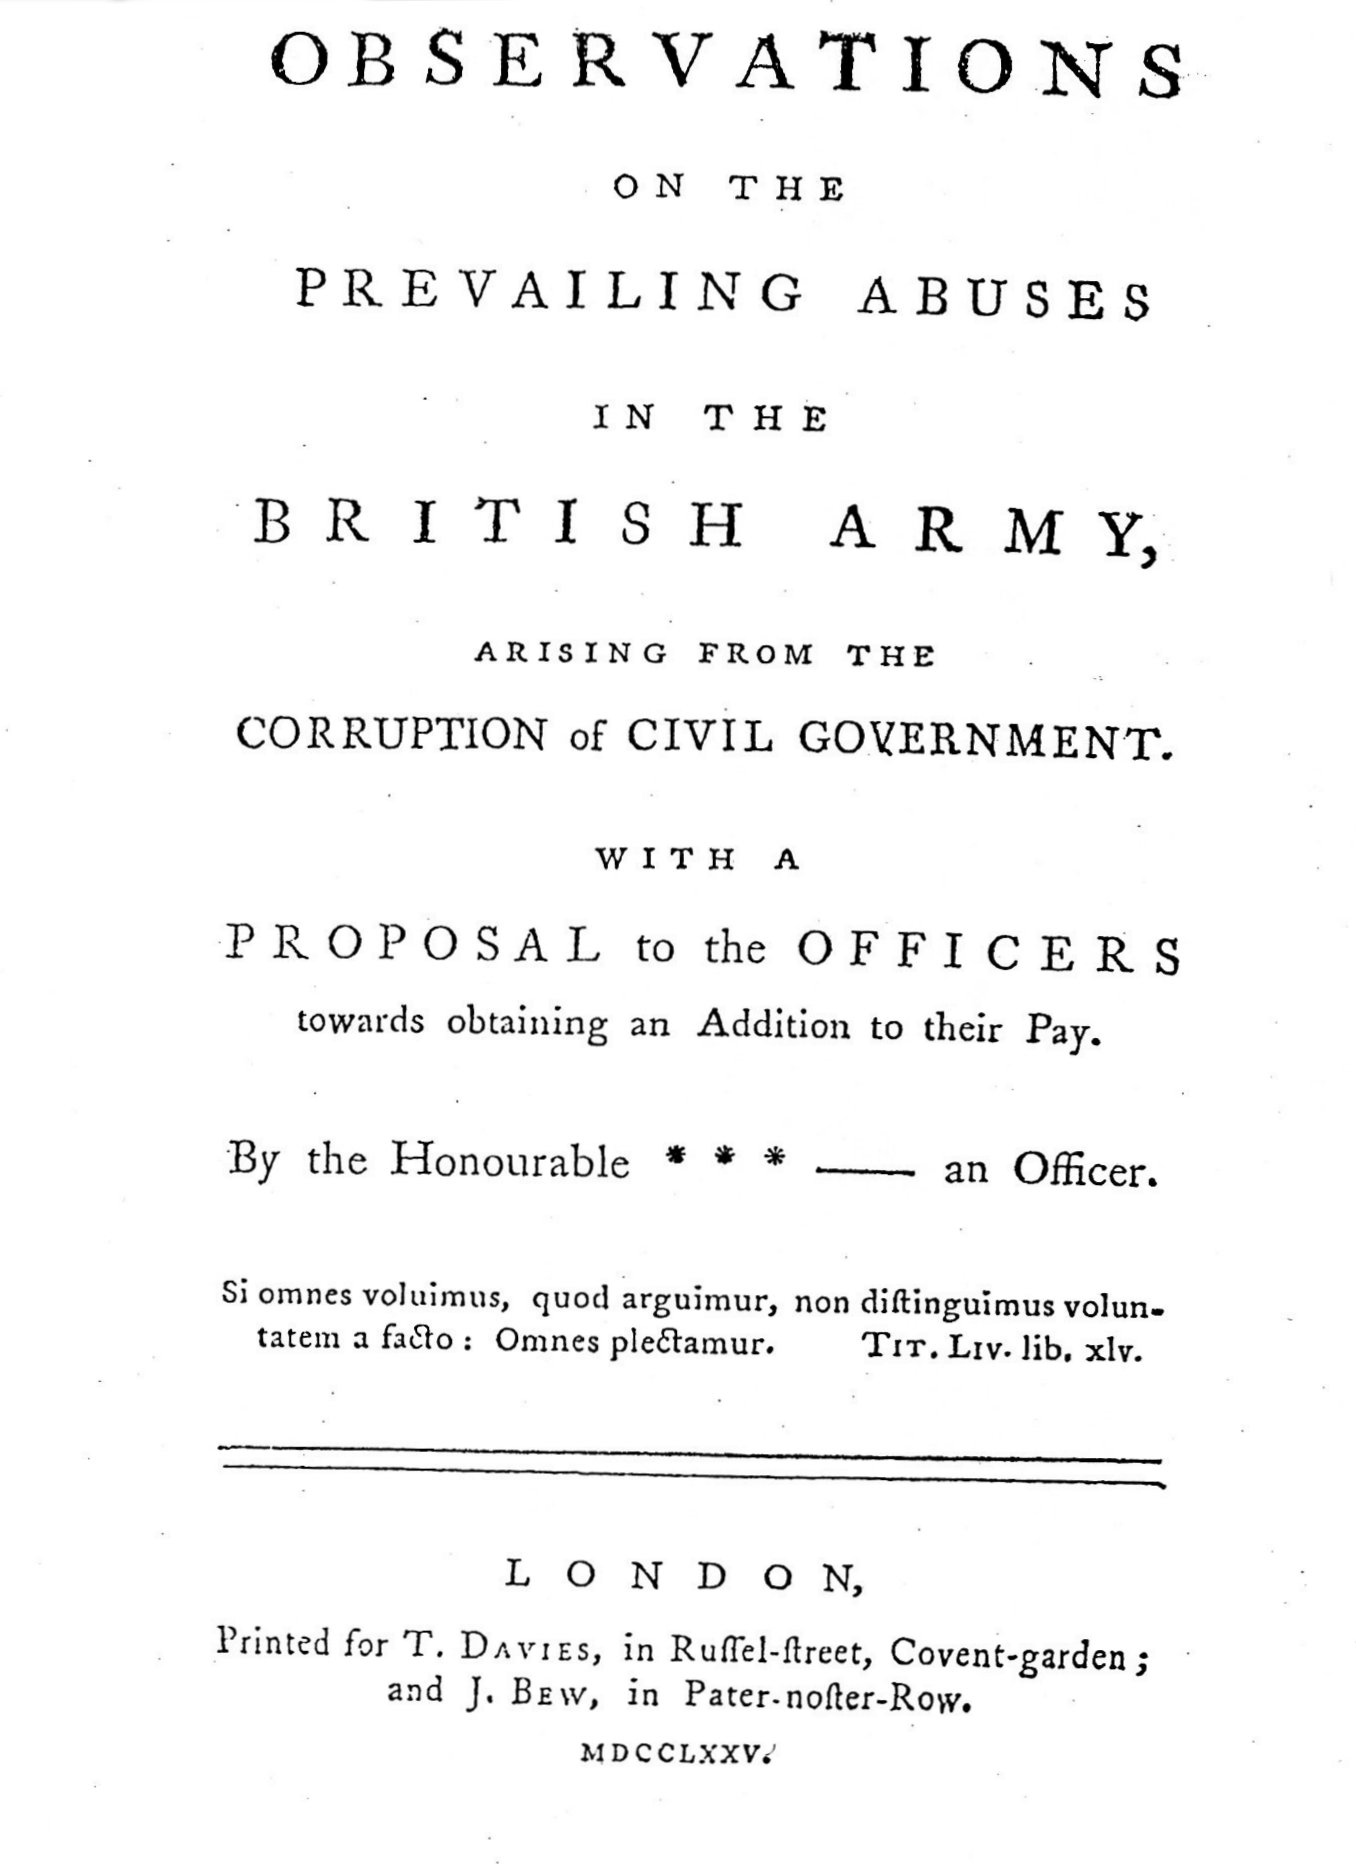 Observations on the Prevailing Abuses in the British Army, London, 1775